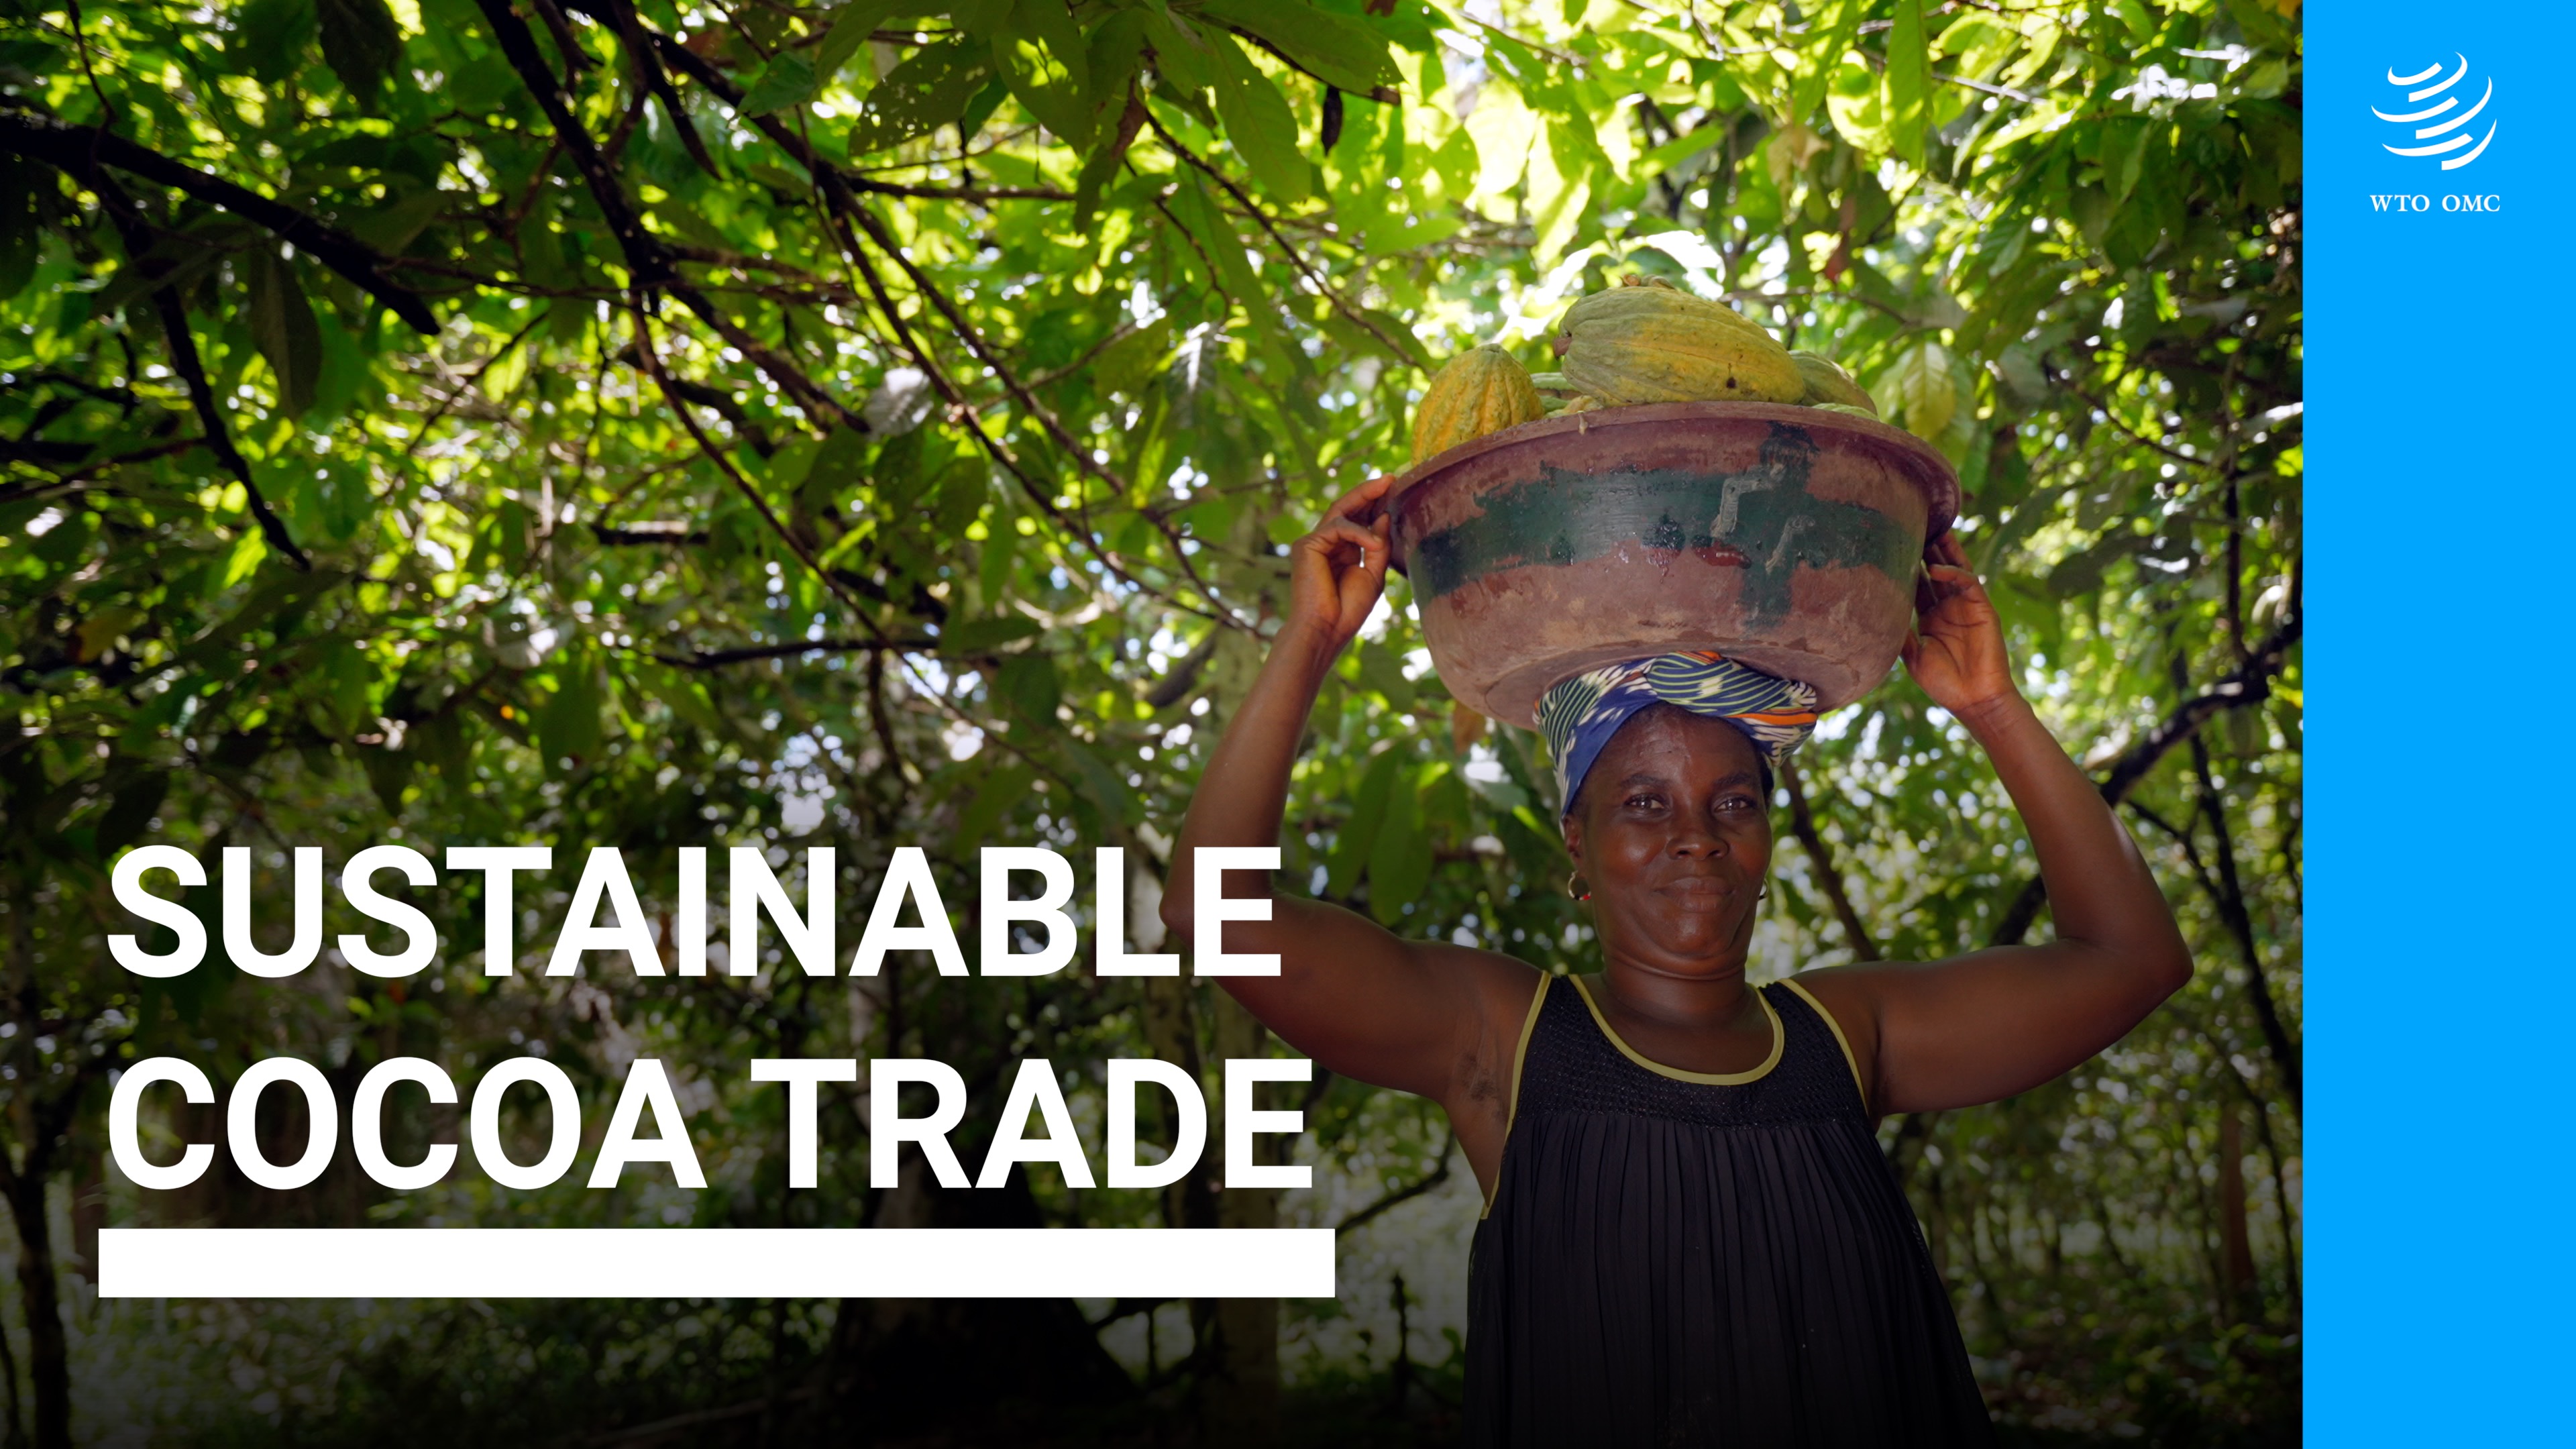 More than beans: Sustainable cocoa trade